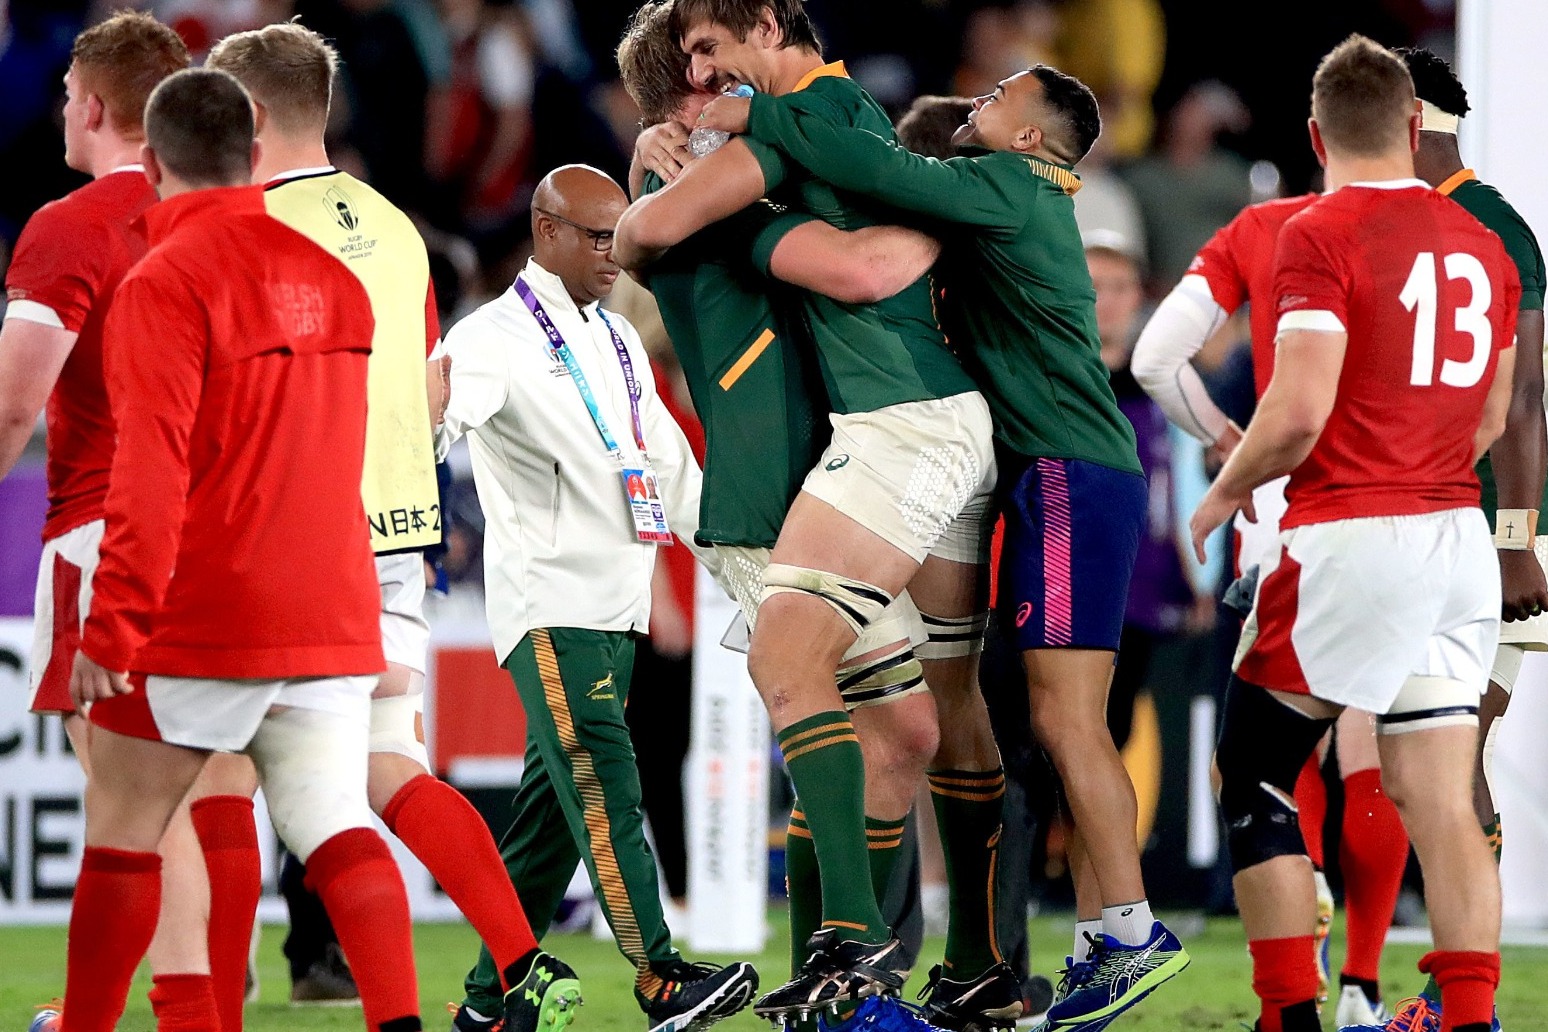 SOUTH AFRICA BEAT WALES TO REACH RUGBY WORLD CUP FINAL 